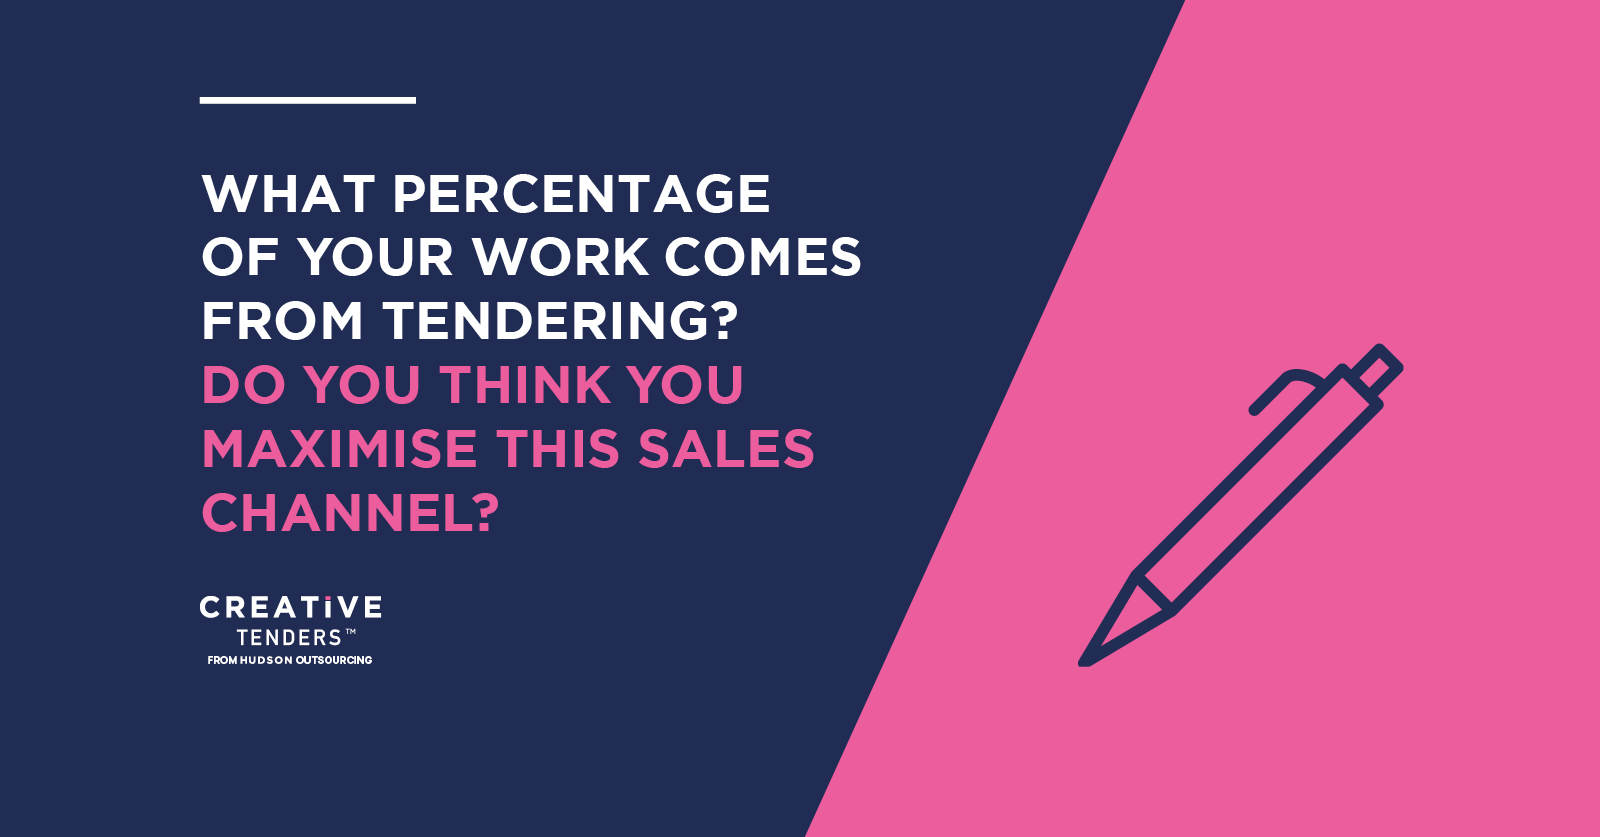 What percentage of your work comes from tendering?